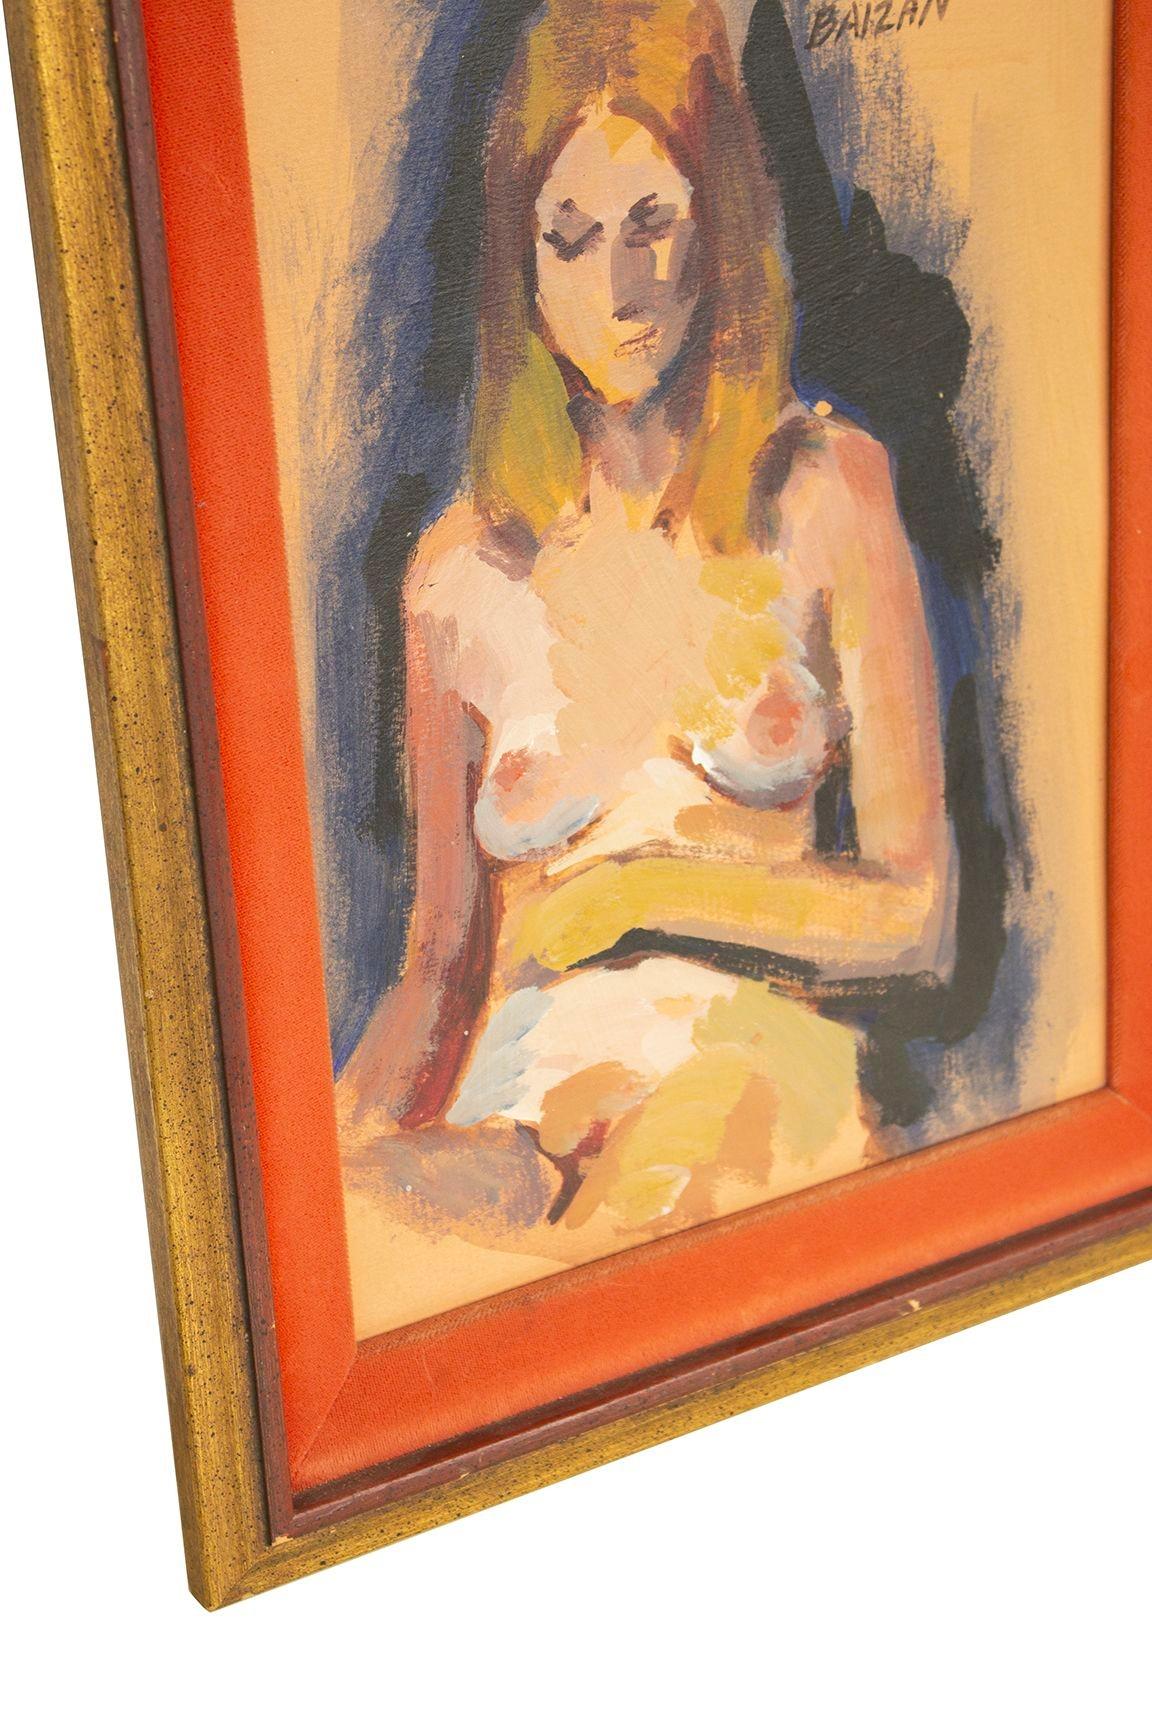 Mid-Century Modern Female Nude Painting by Baizan For Sale